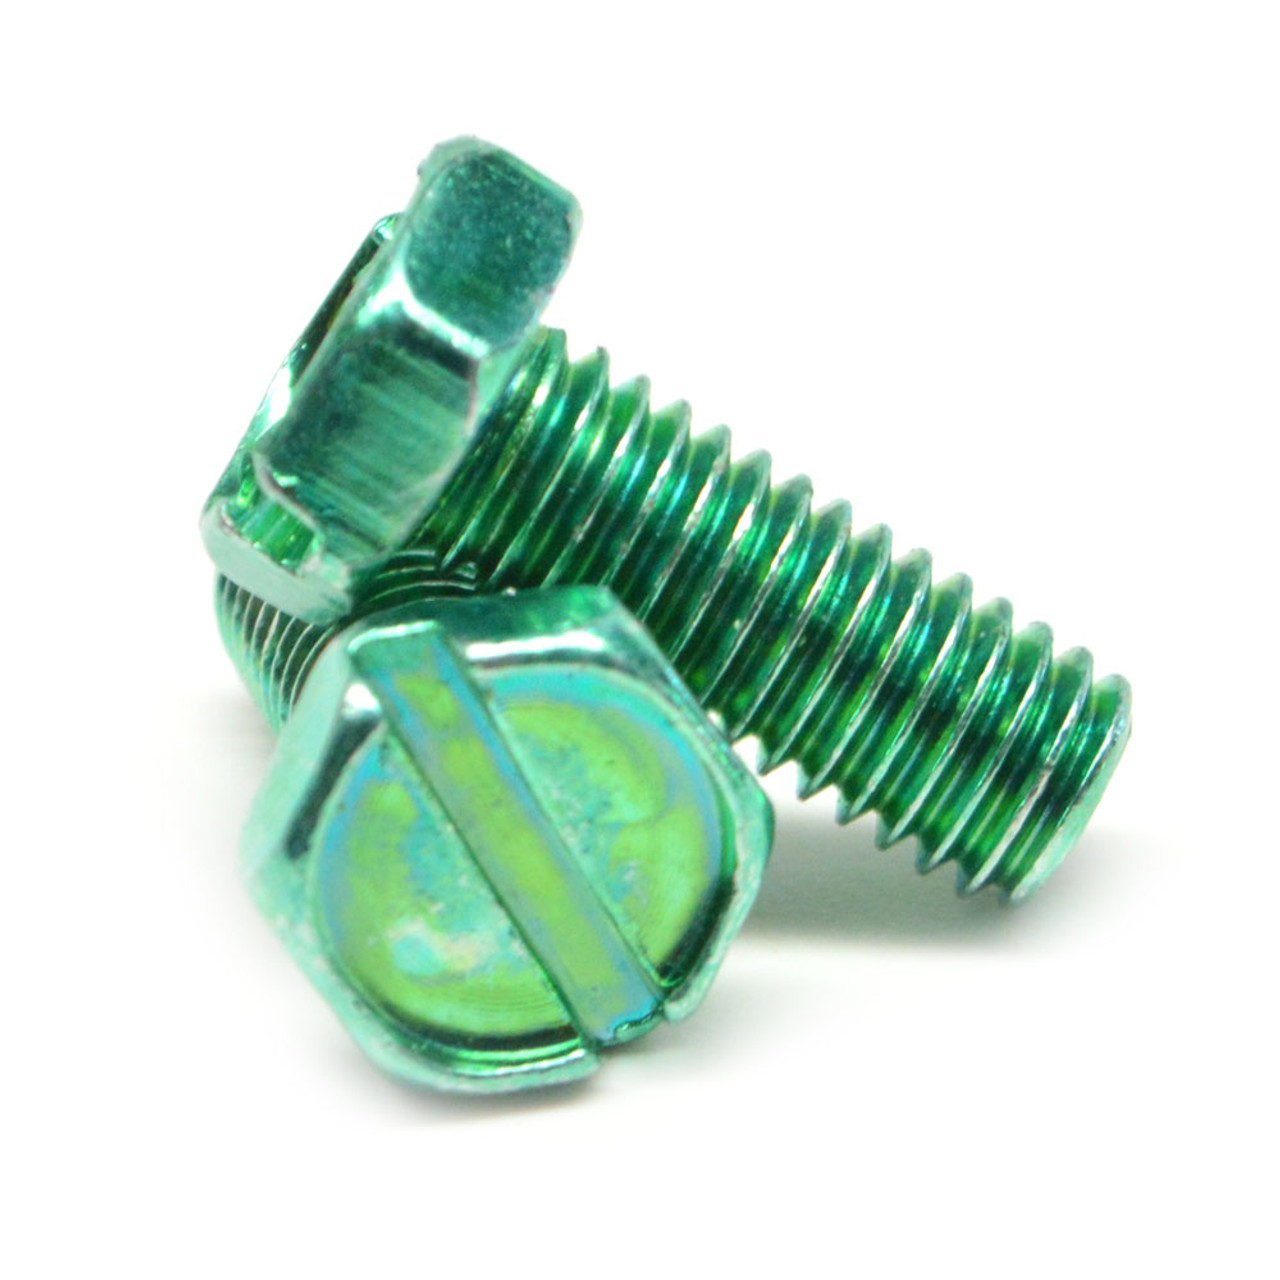 #10-32 x 3/8" (FT) Fine Thread Machine Screw Slotted Indented Hex Head Low Carbon Steel Green Zinc Plated